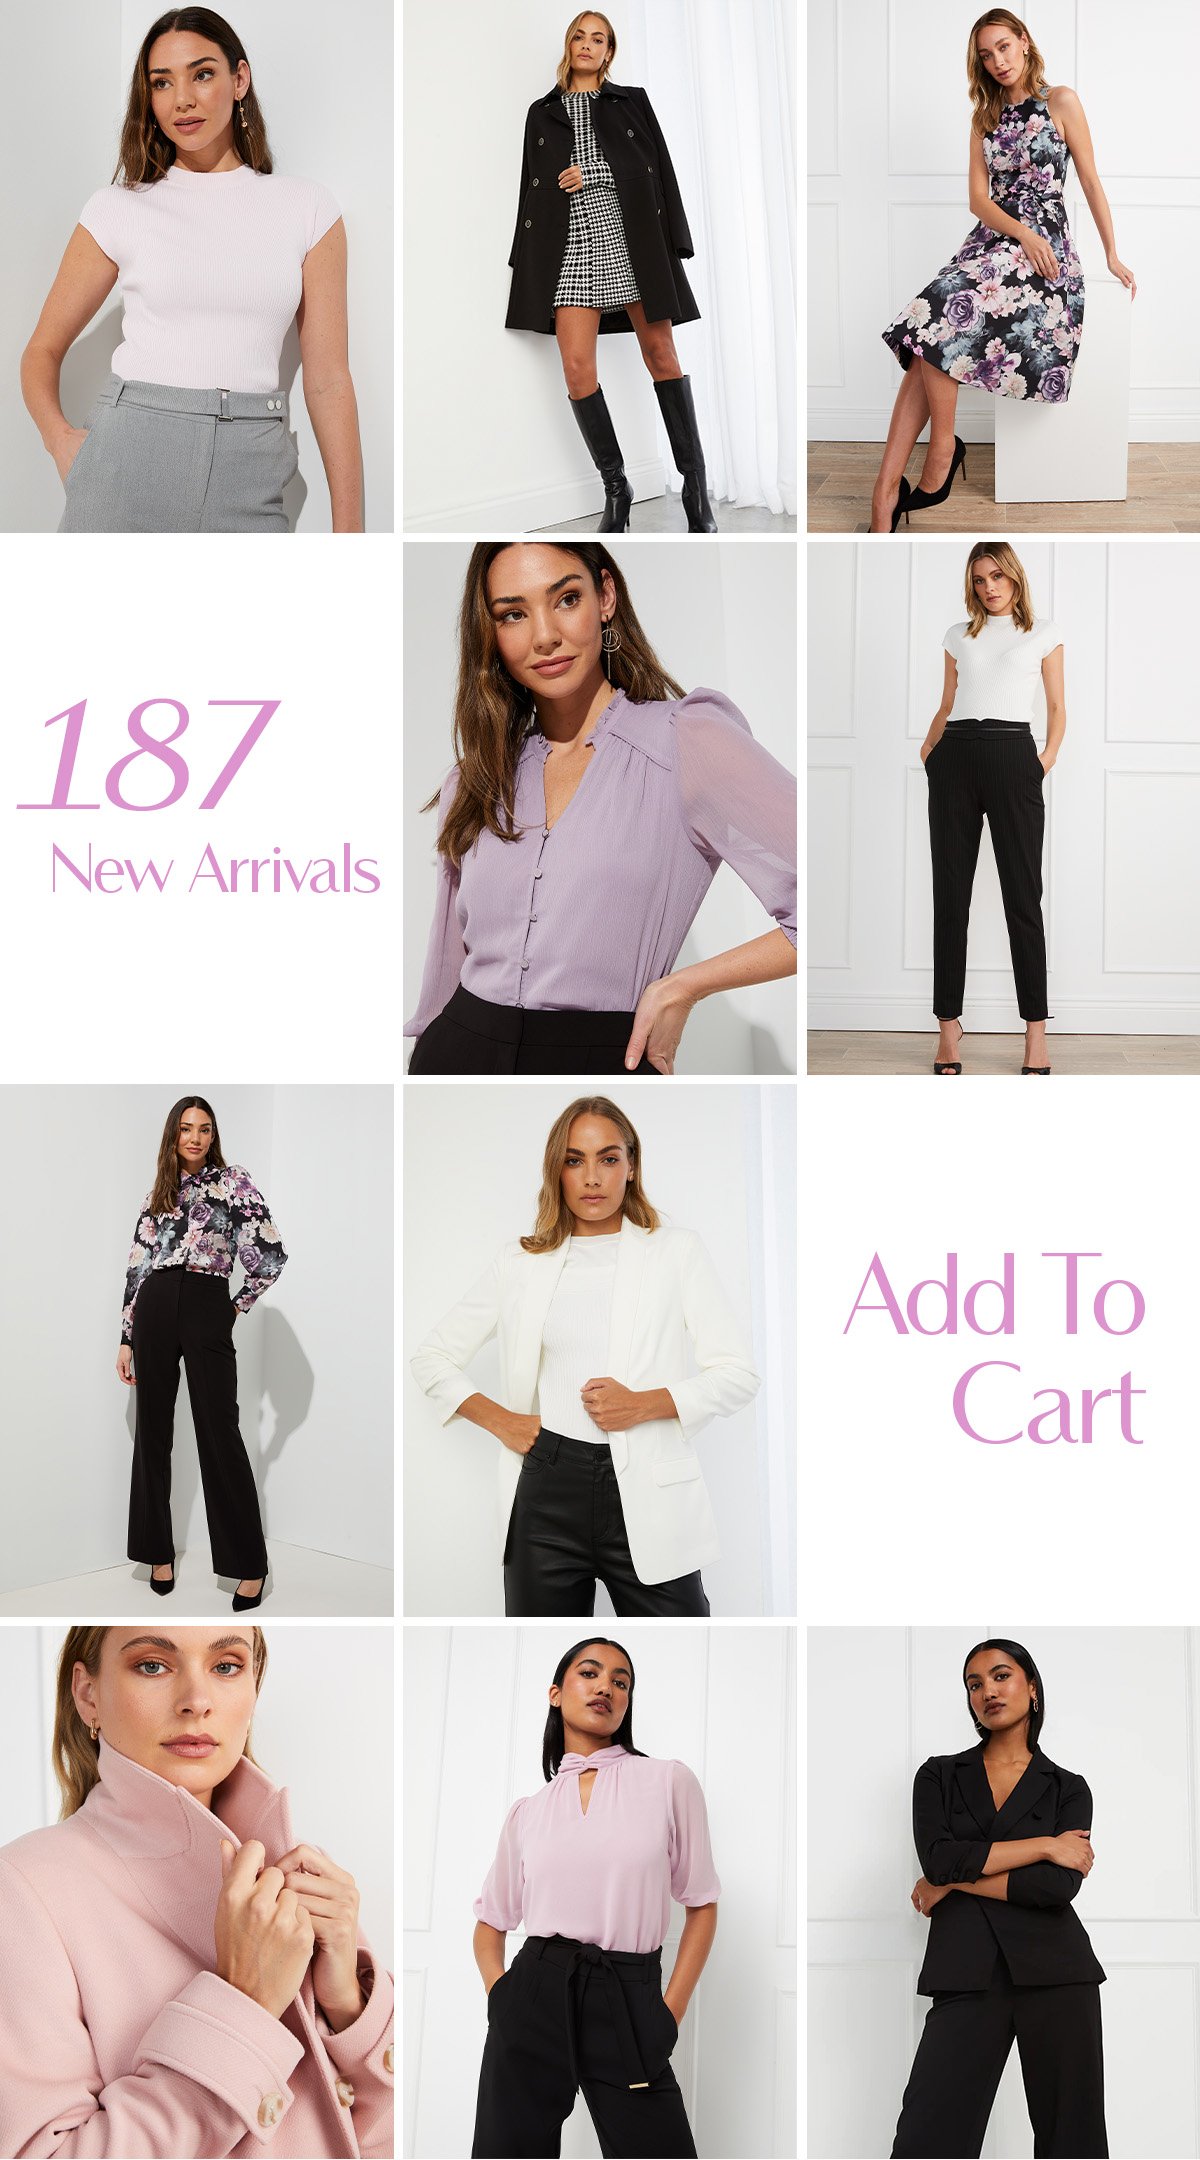 187 new arrivals, add to cart